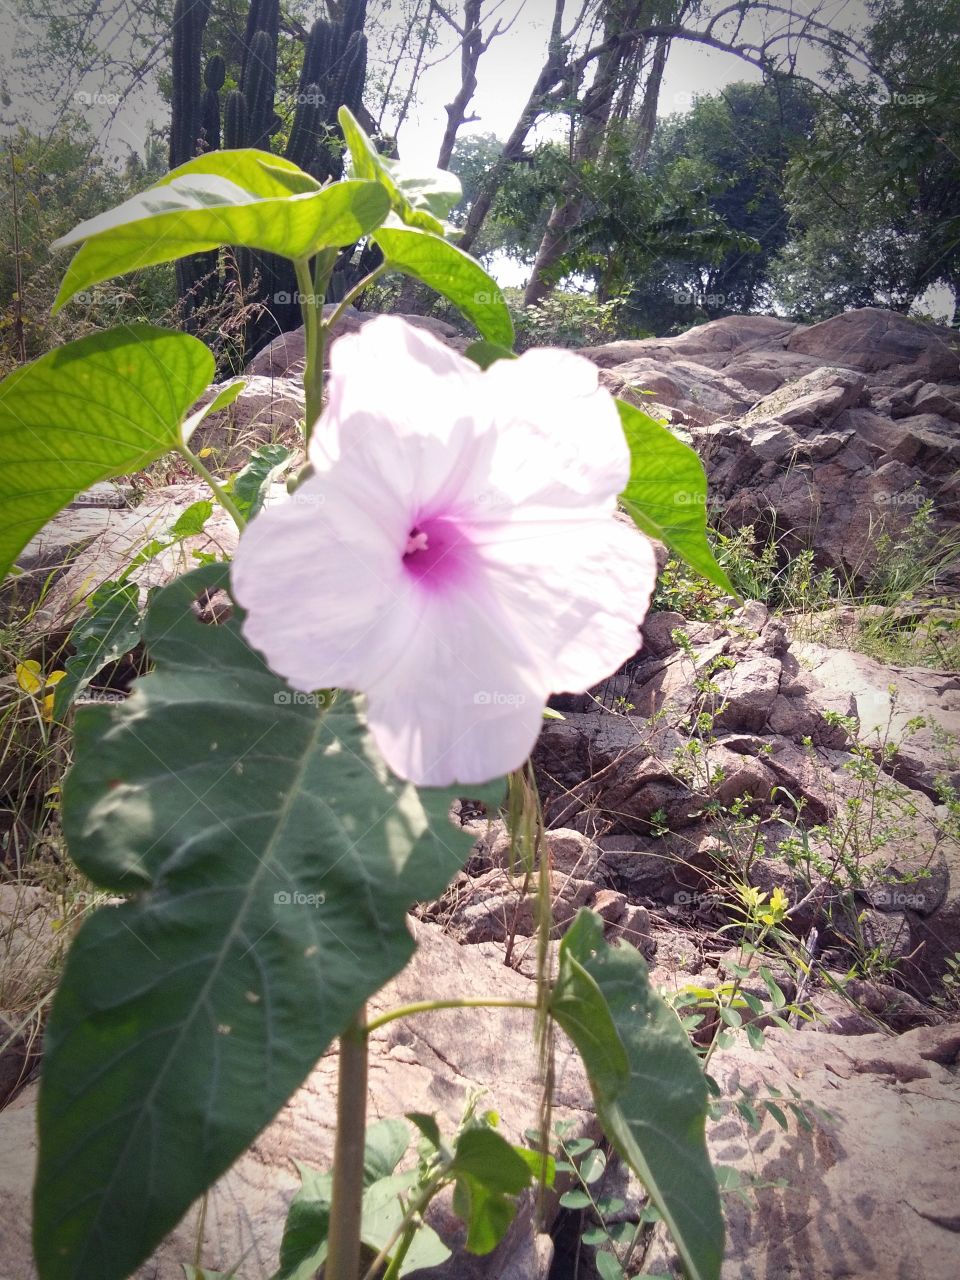 river flower at a natural flower and beautiful